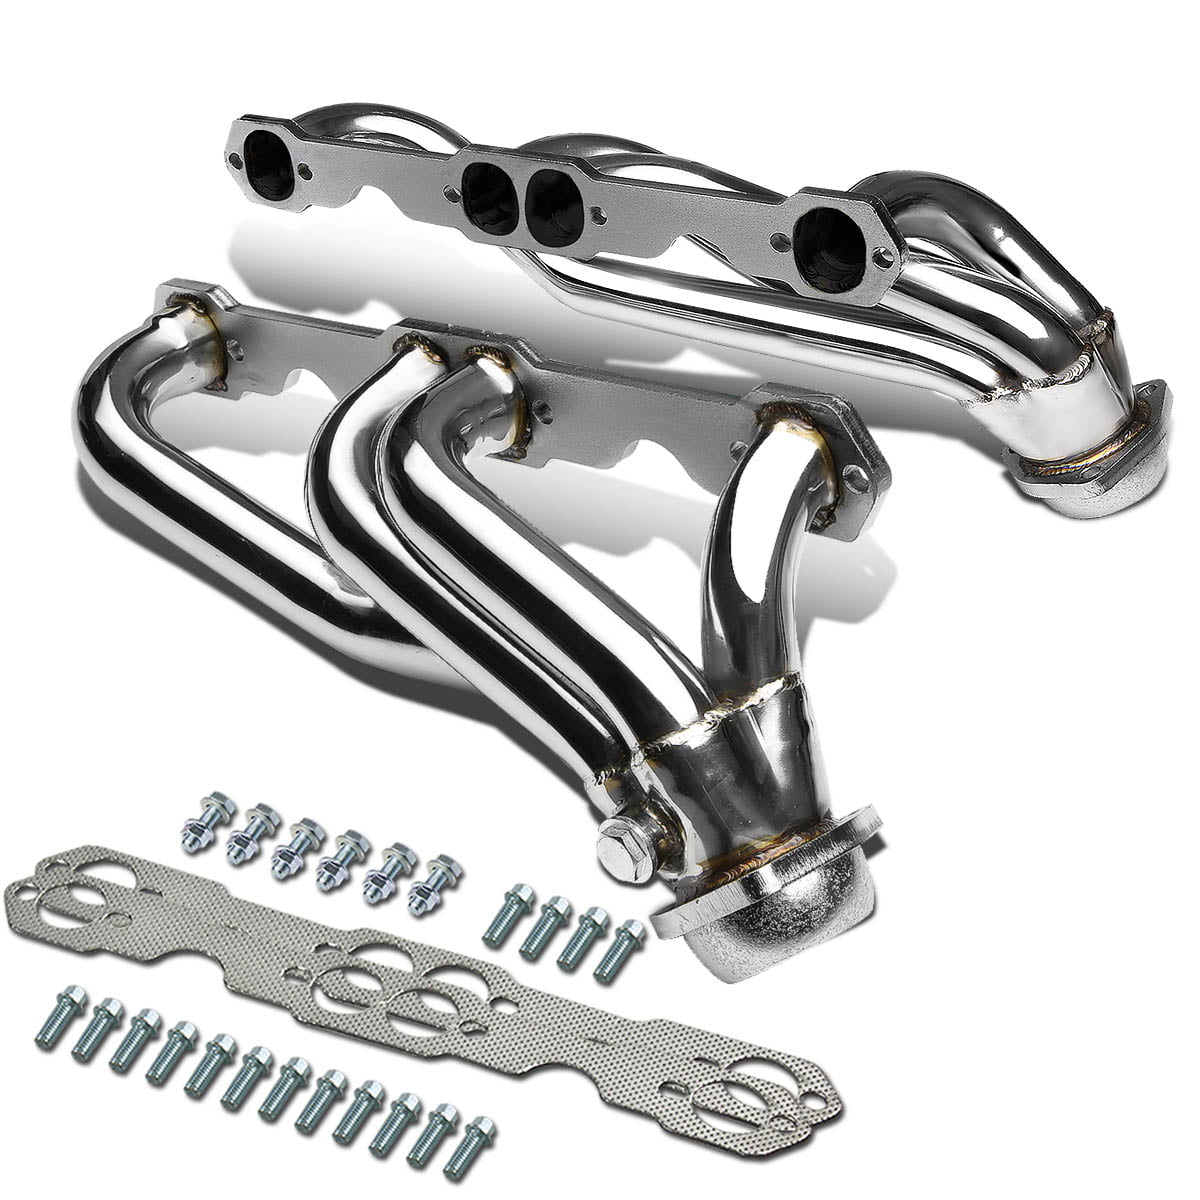 92-95 GMC Chevy Truck SUV 5.0L 5.7L 305-350 Stainless Steel Exhaust Header 89 90 91 92 93 94